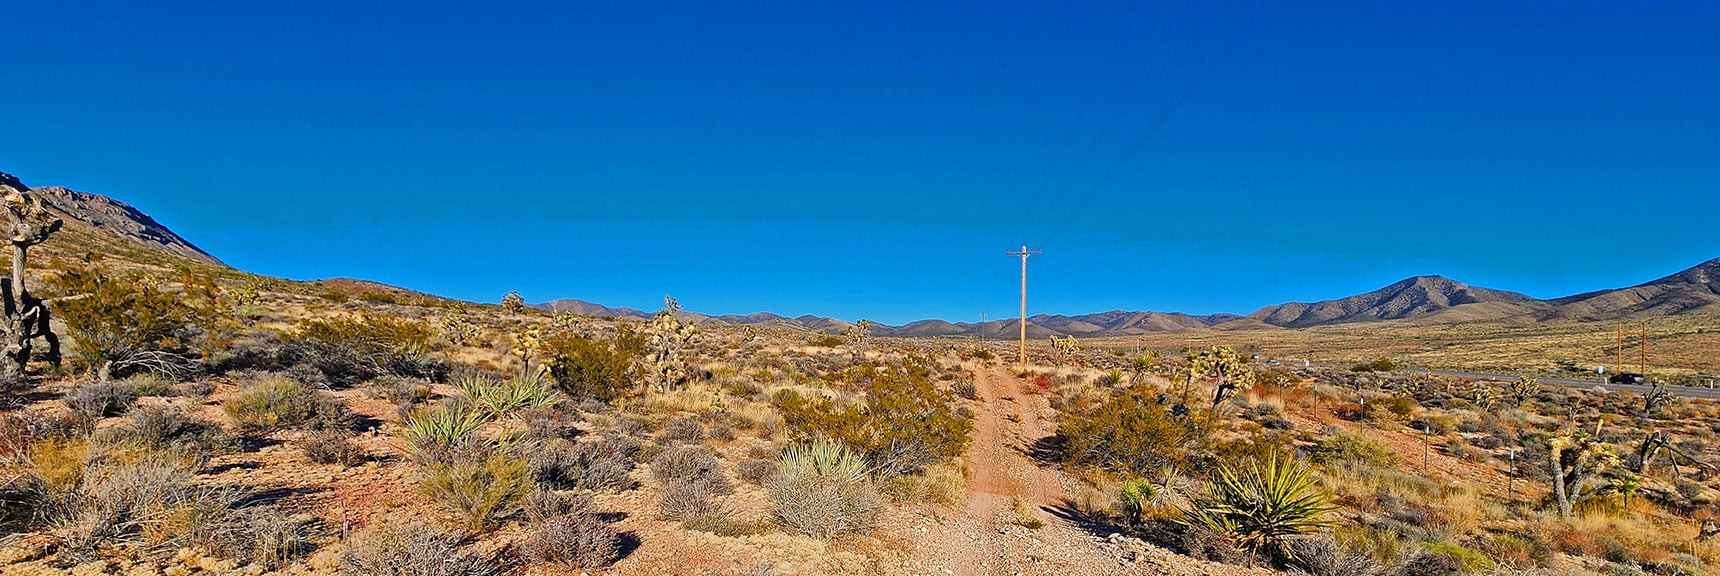 Stick to Powerline Maintenance Rd. for Safety on Active Target Shooting Days. | Landmark Bluff Circuit | Lovell Canyon, Nevada